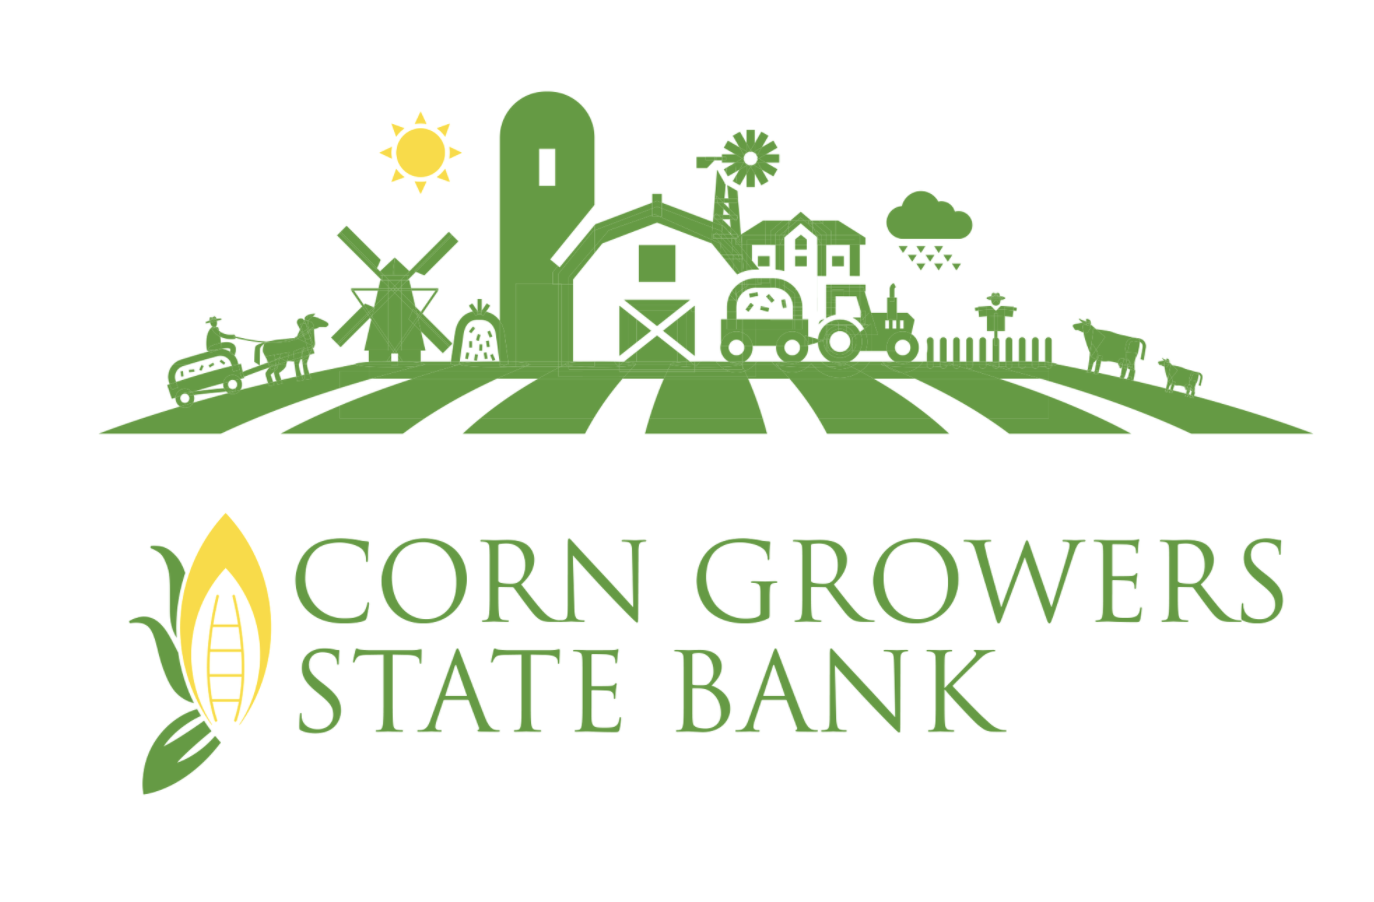 Helping Corn Growers State Bank Design T-Shirts